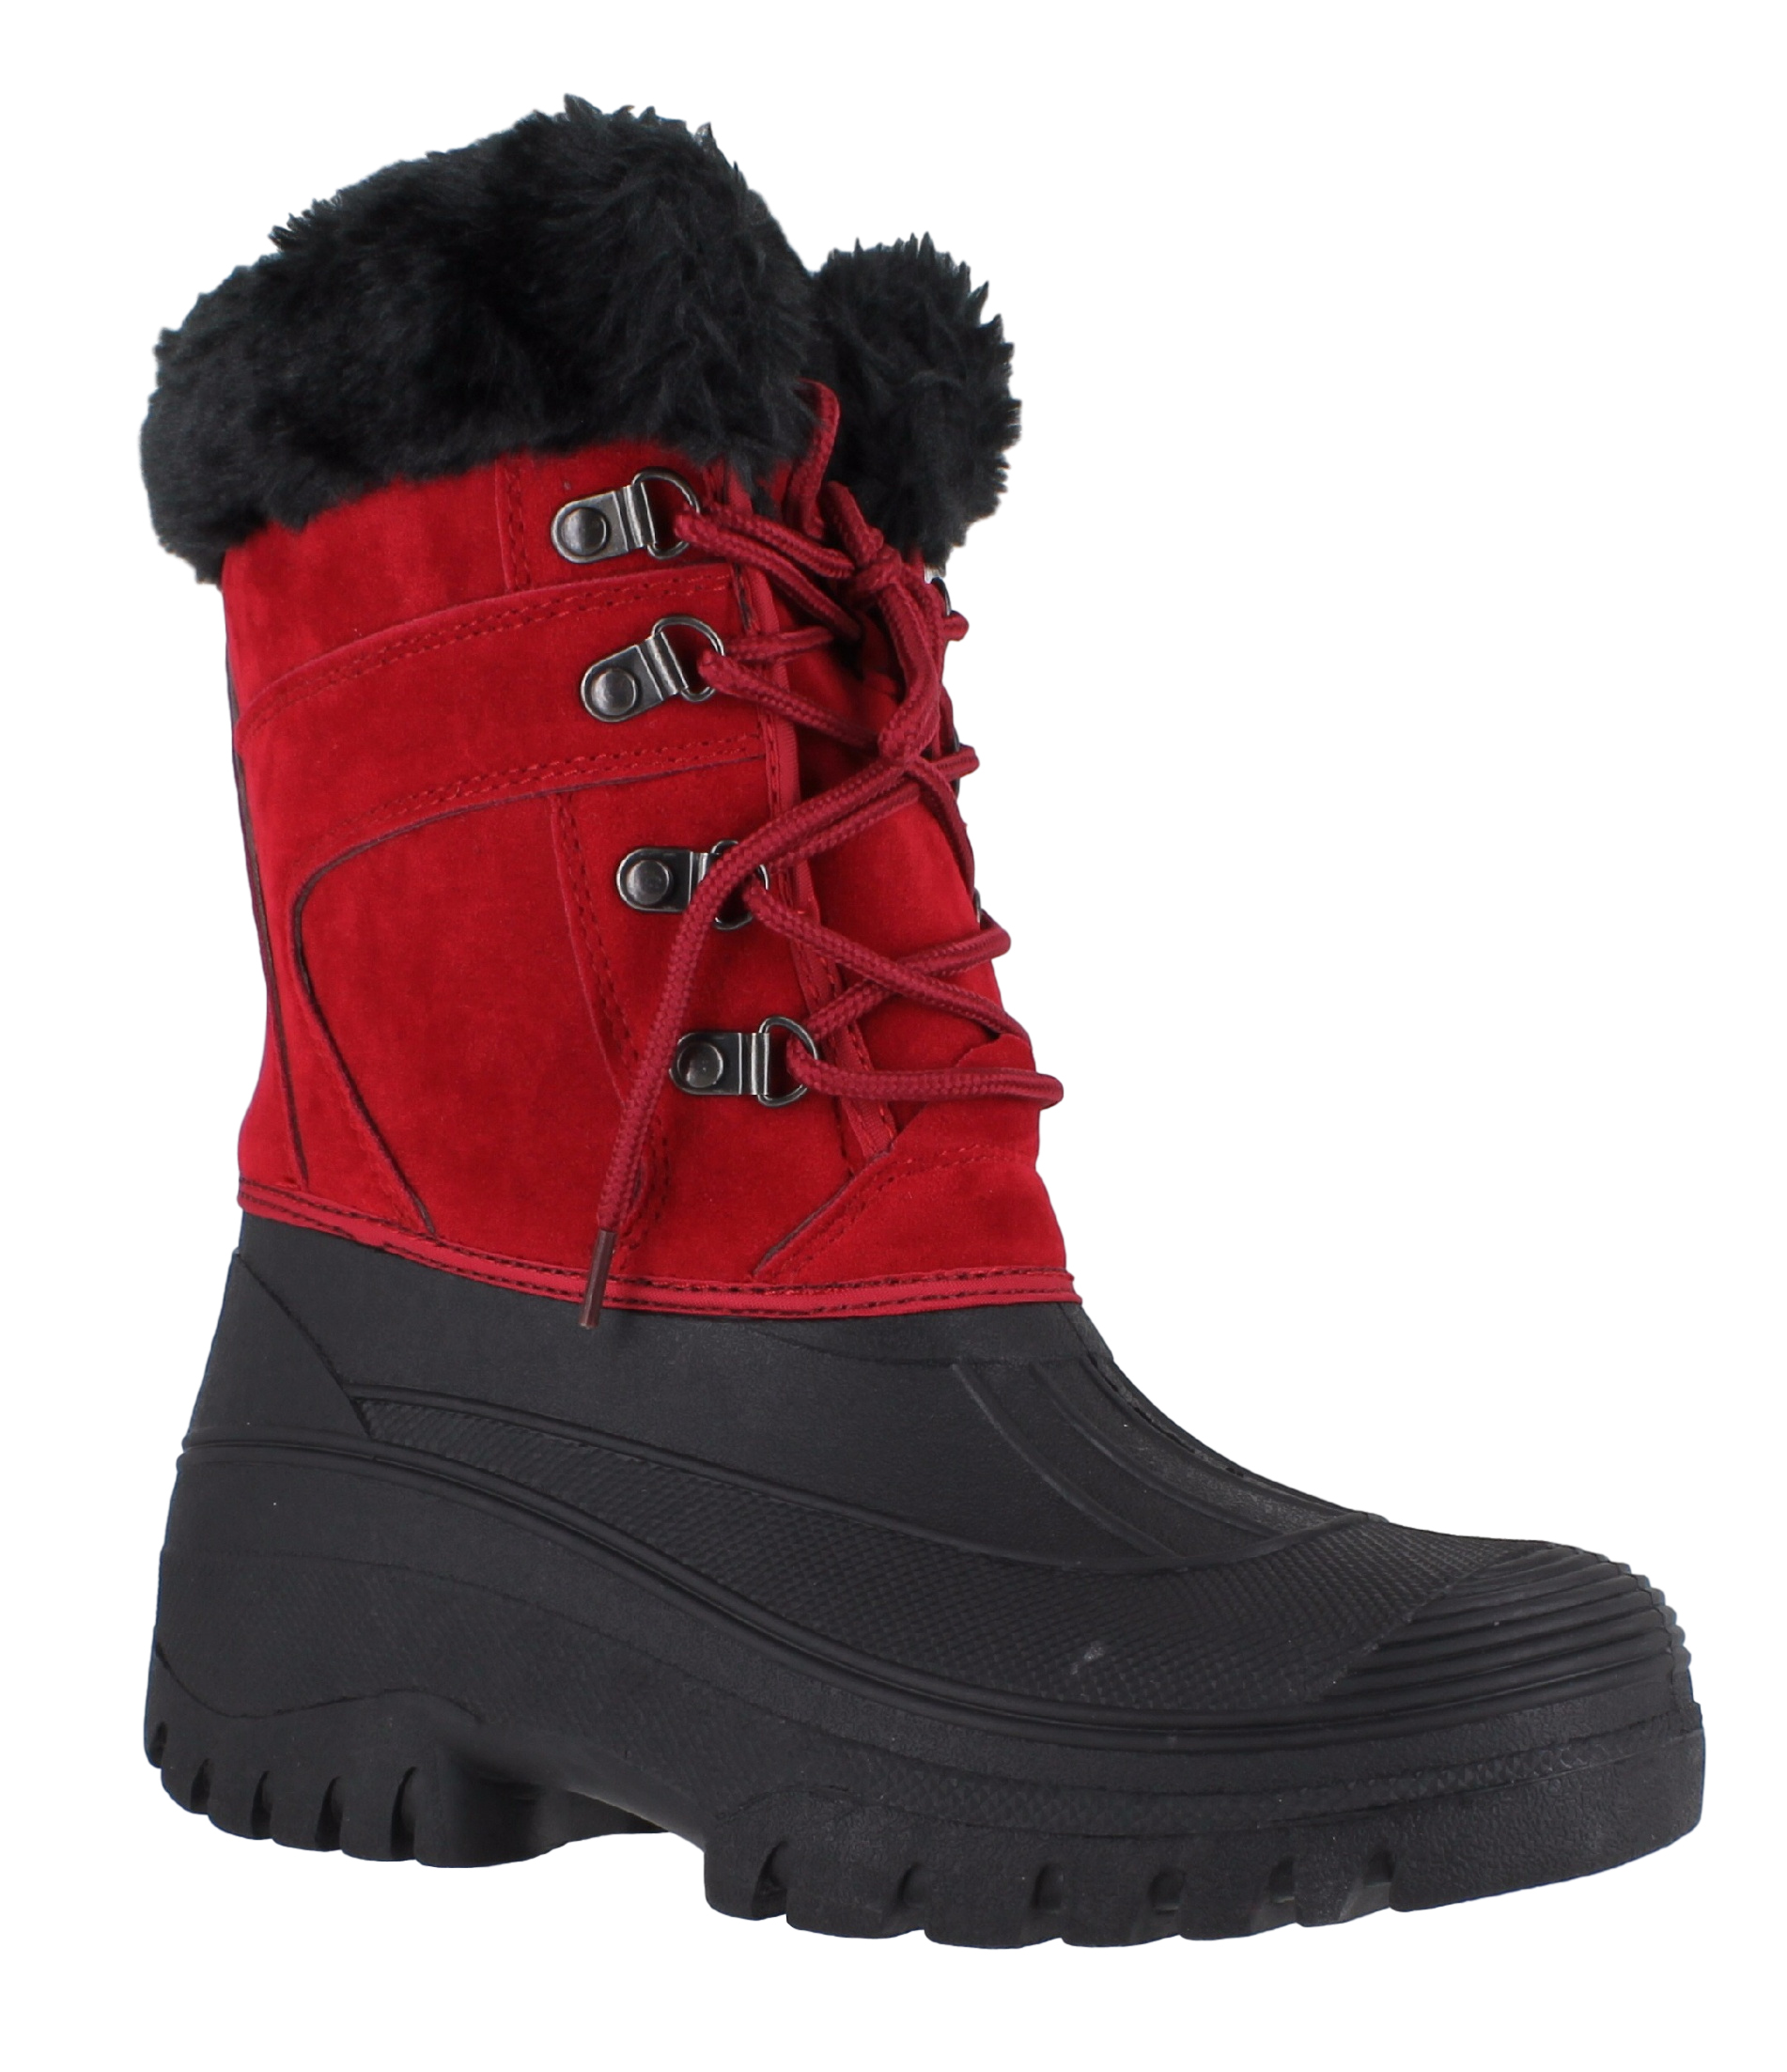 Womens GroundWork Mukker Stable Yard Winter Snow Lace Up Boots Sizes 4 to 8